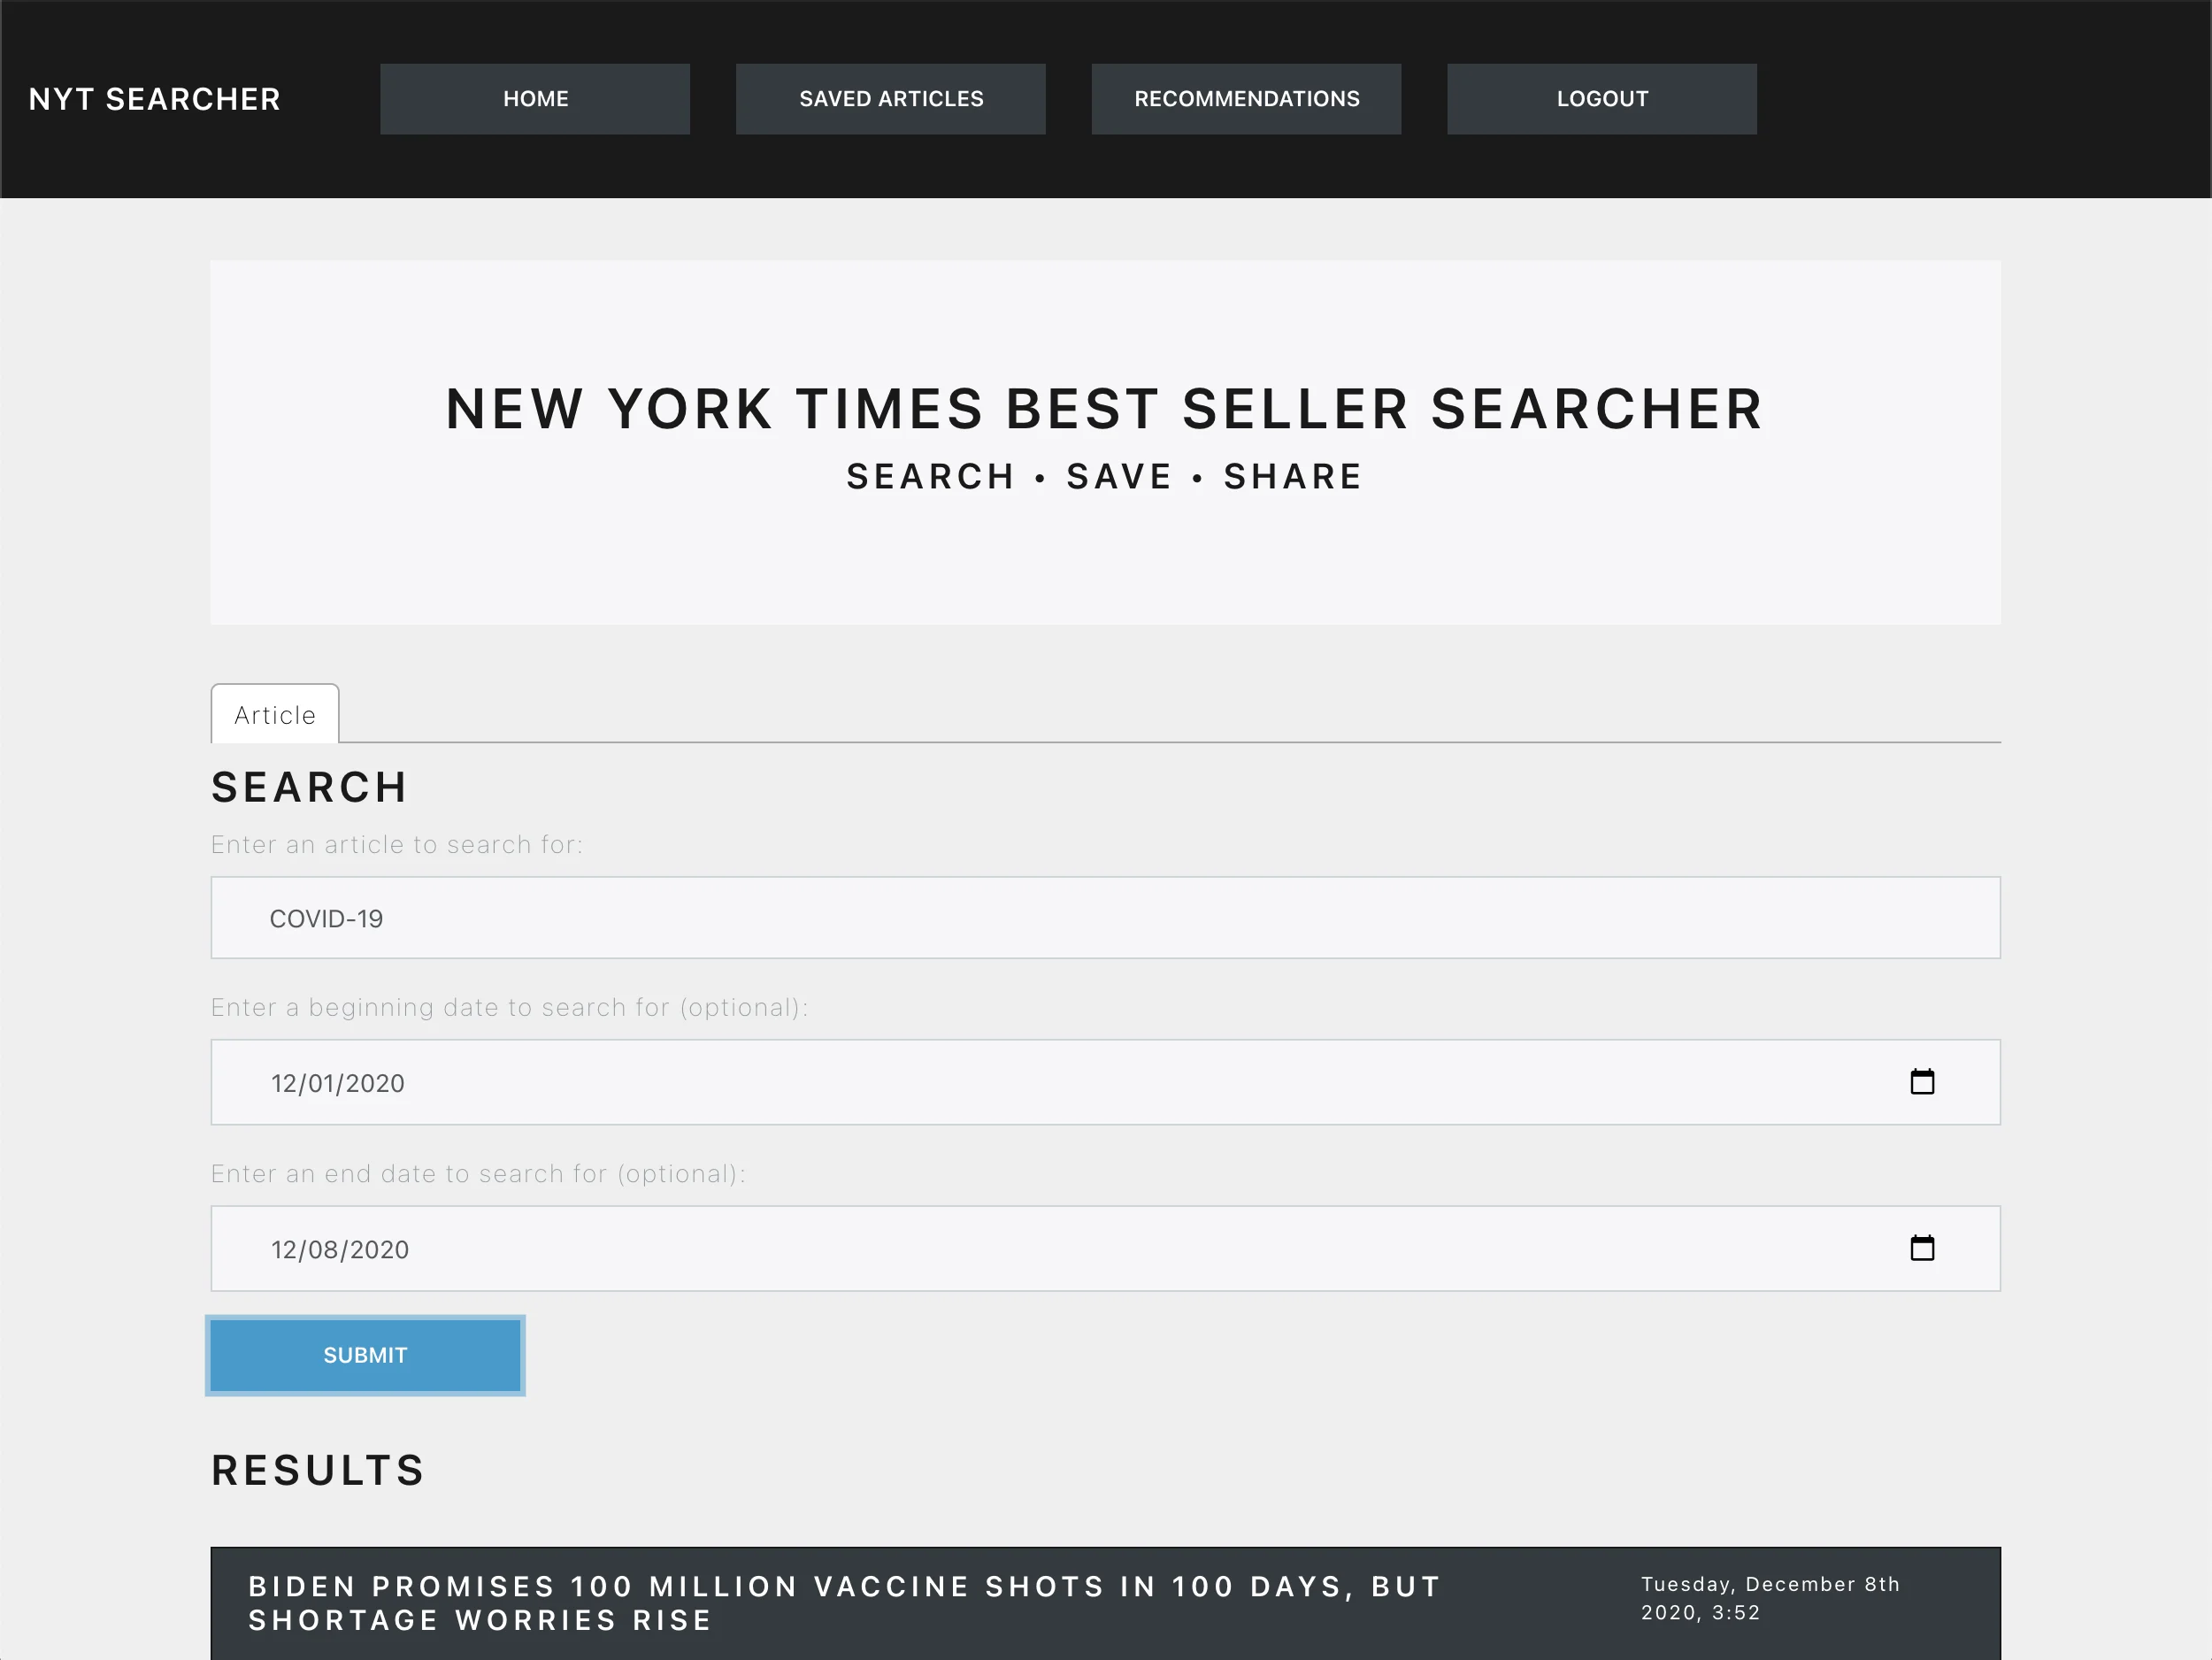 NYT Searcher